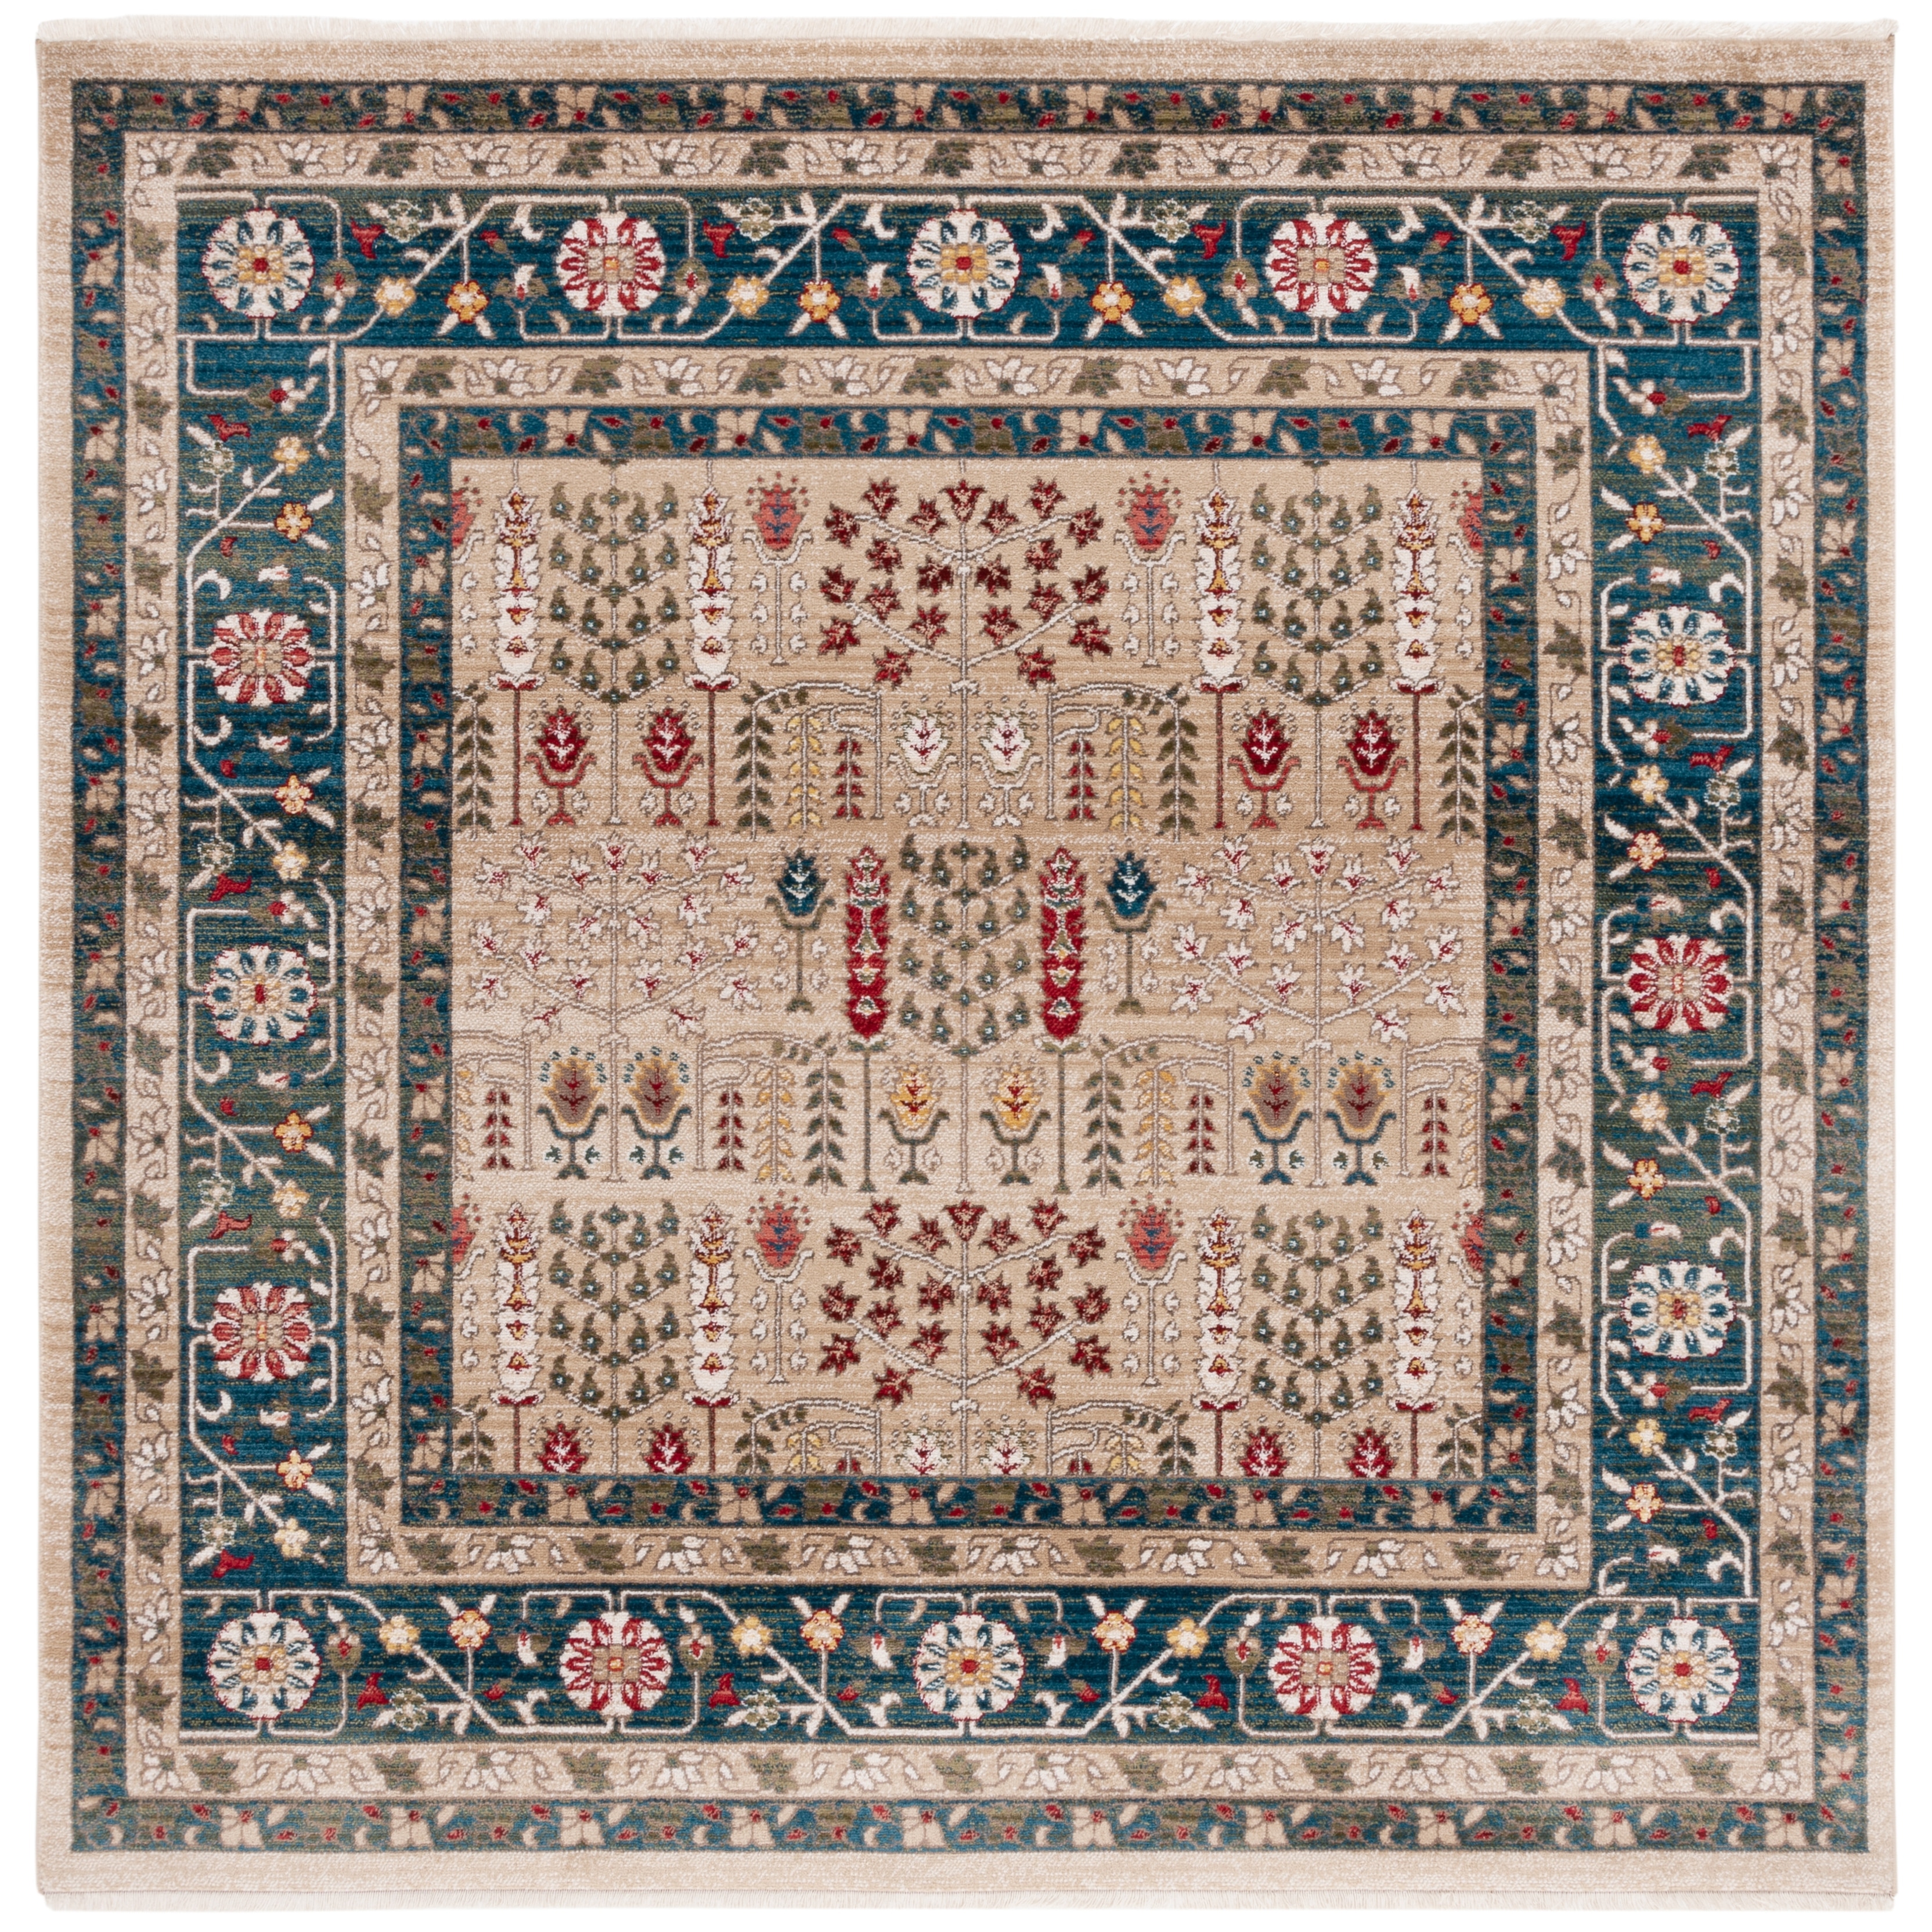 Sara - 3x4 Area Rug - The Rug Mine - Free Shipping Worldwide - Authentic  Oriental Rugs